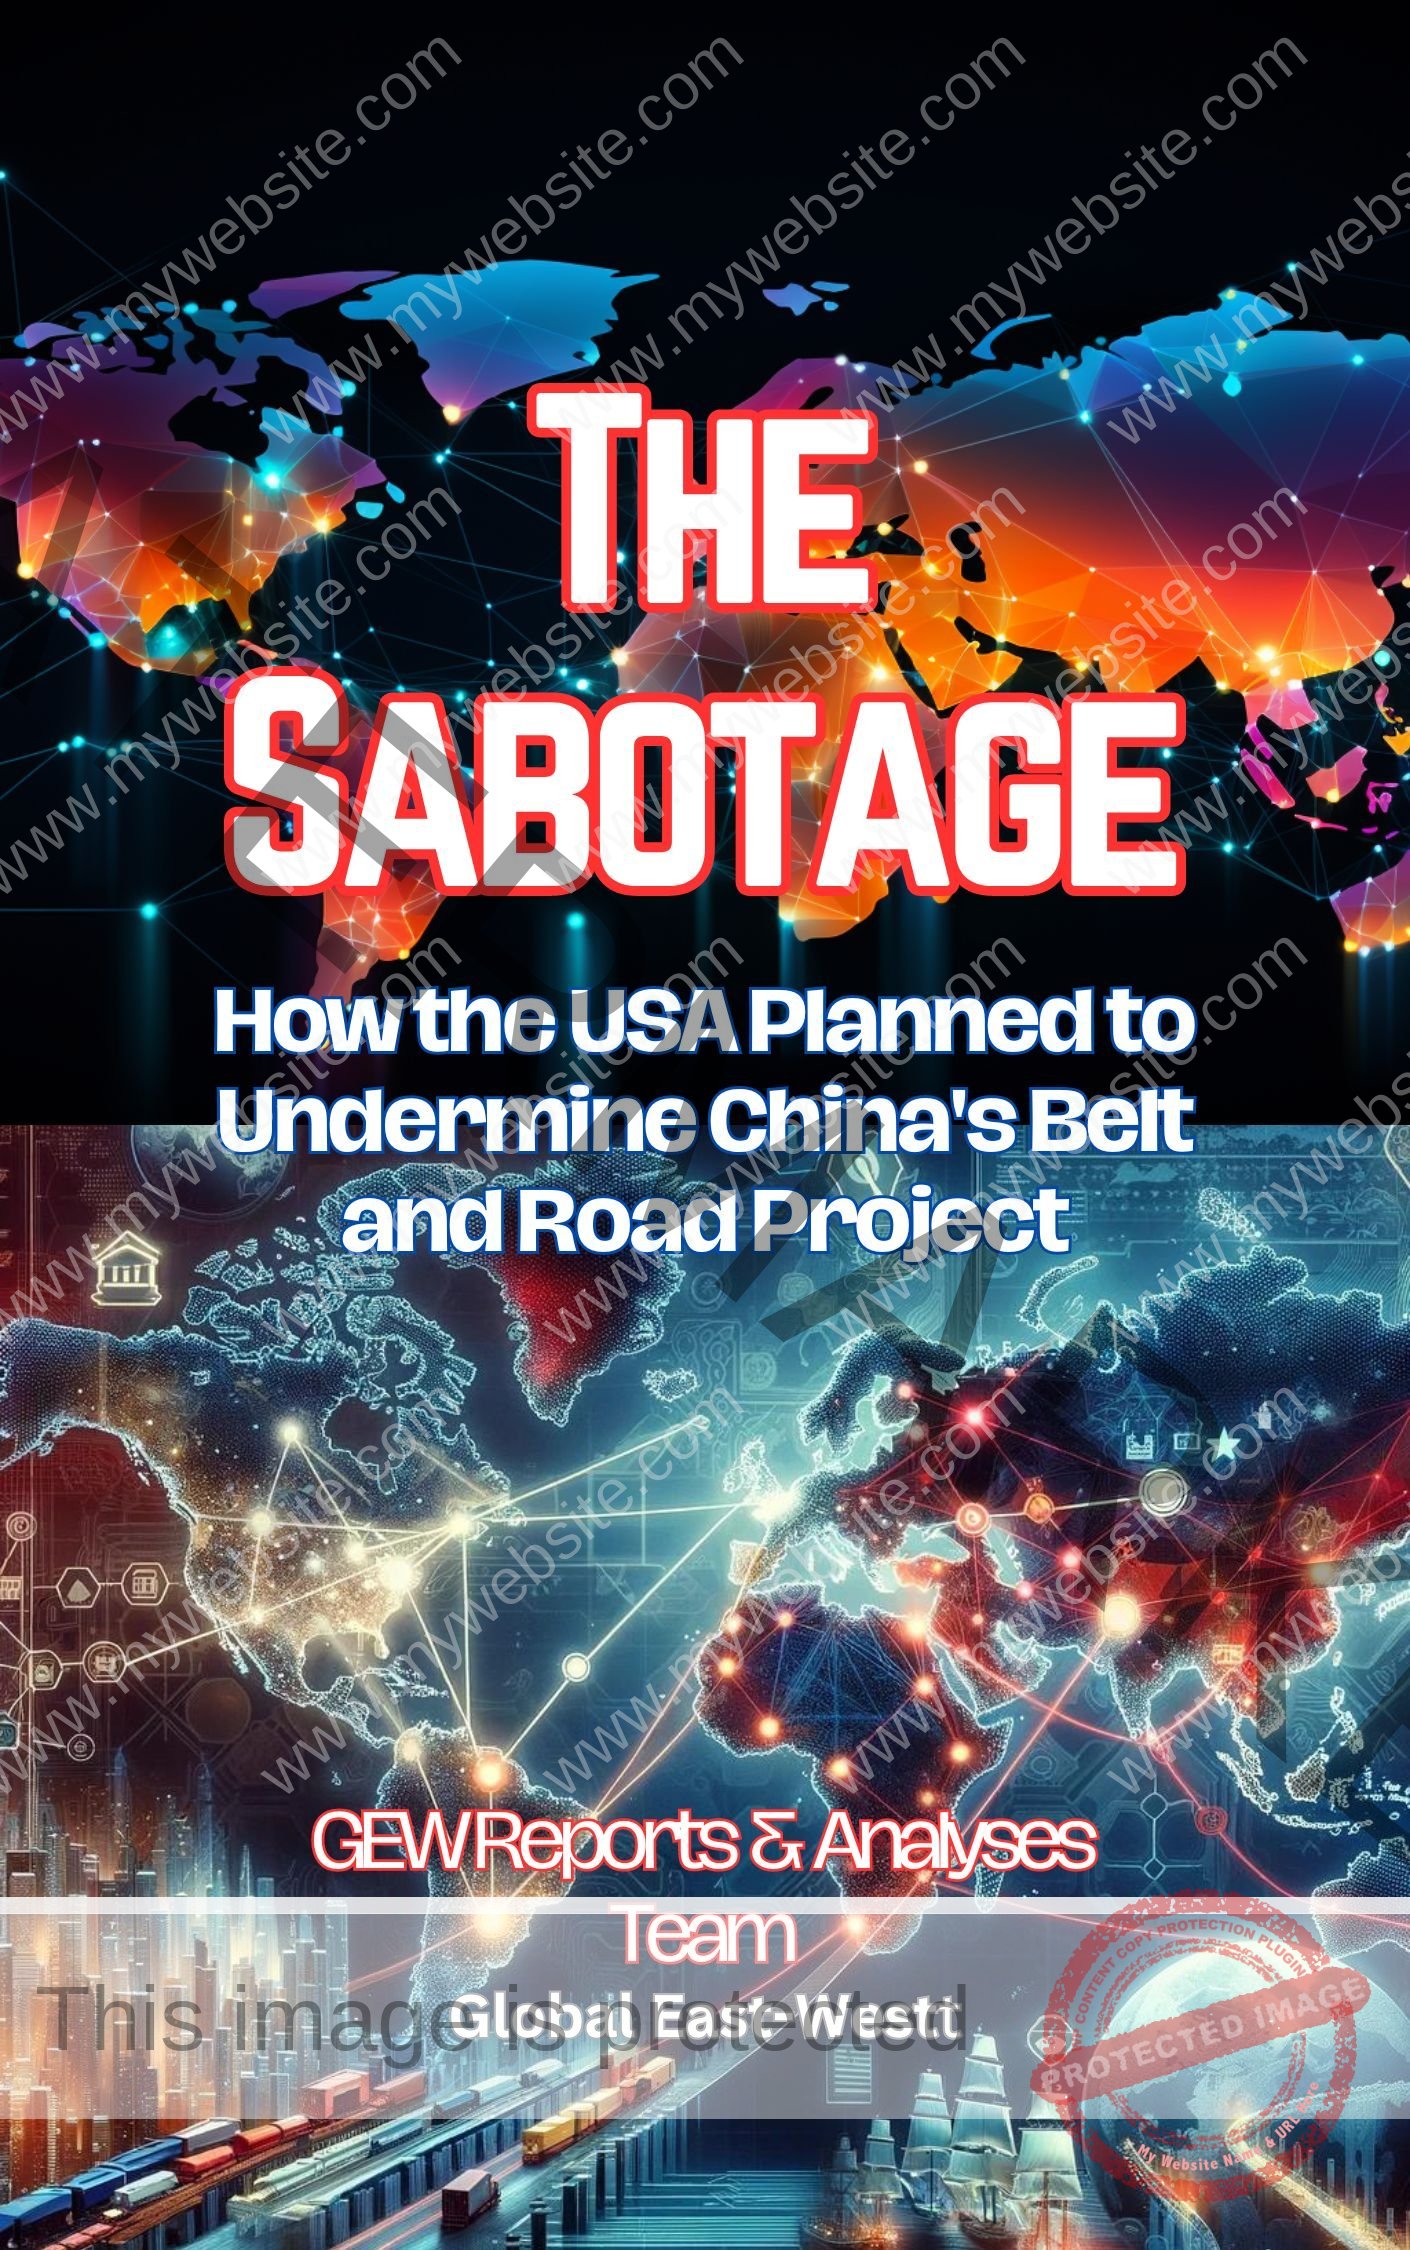 The Sabotage: How the USA Planned to Undermine China’s Belt and Road Project